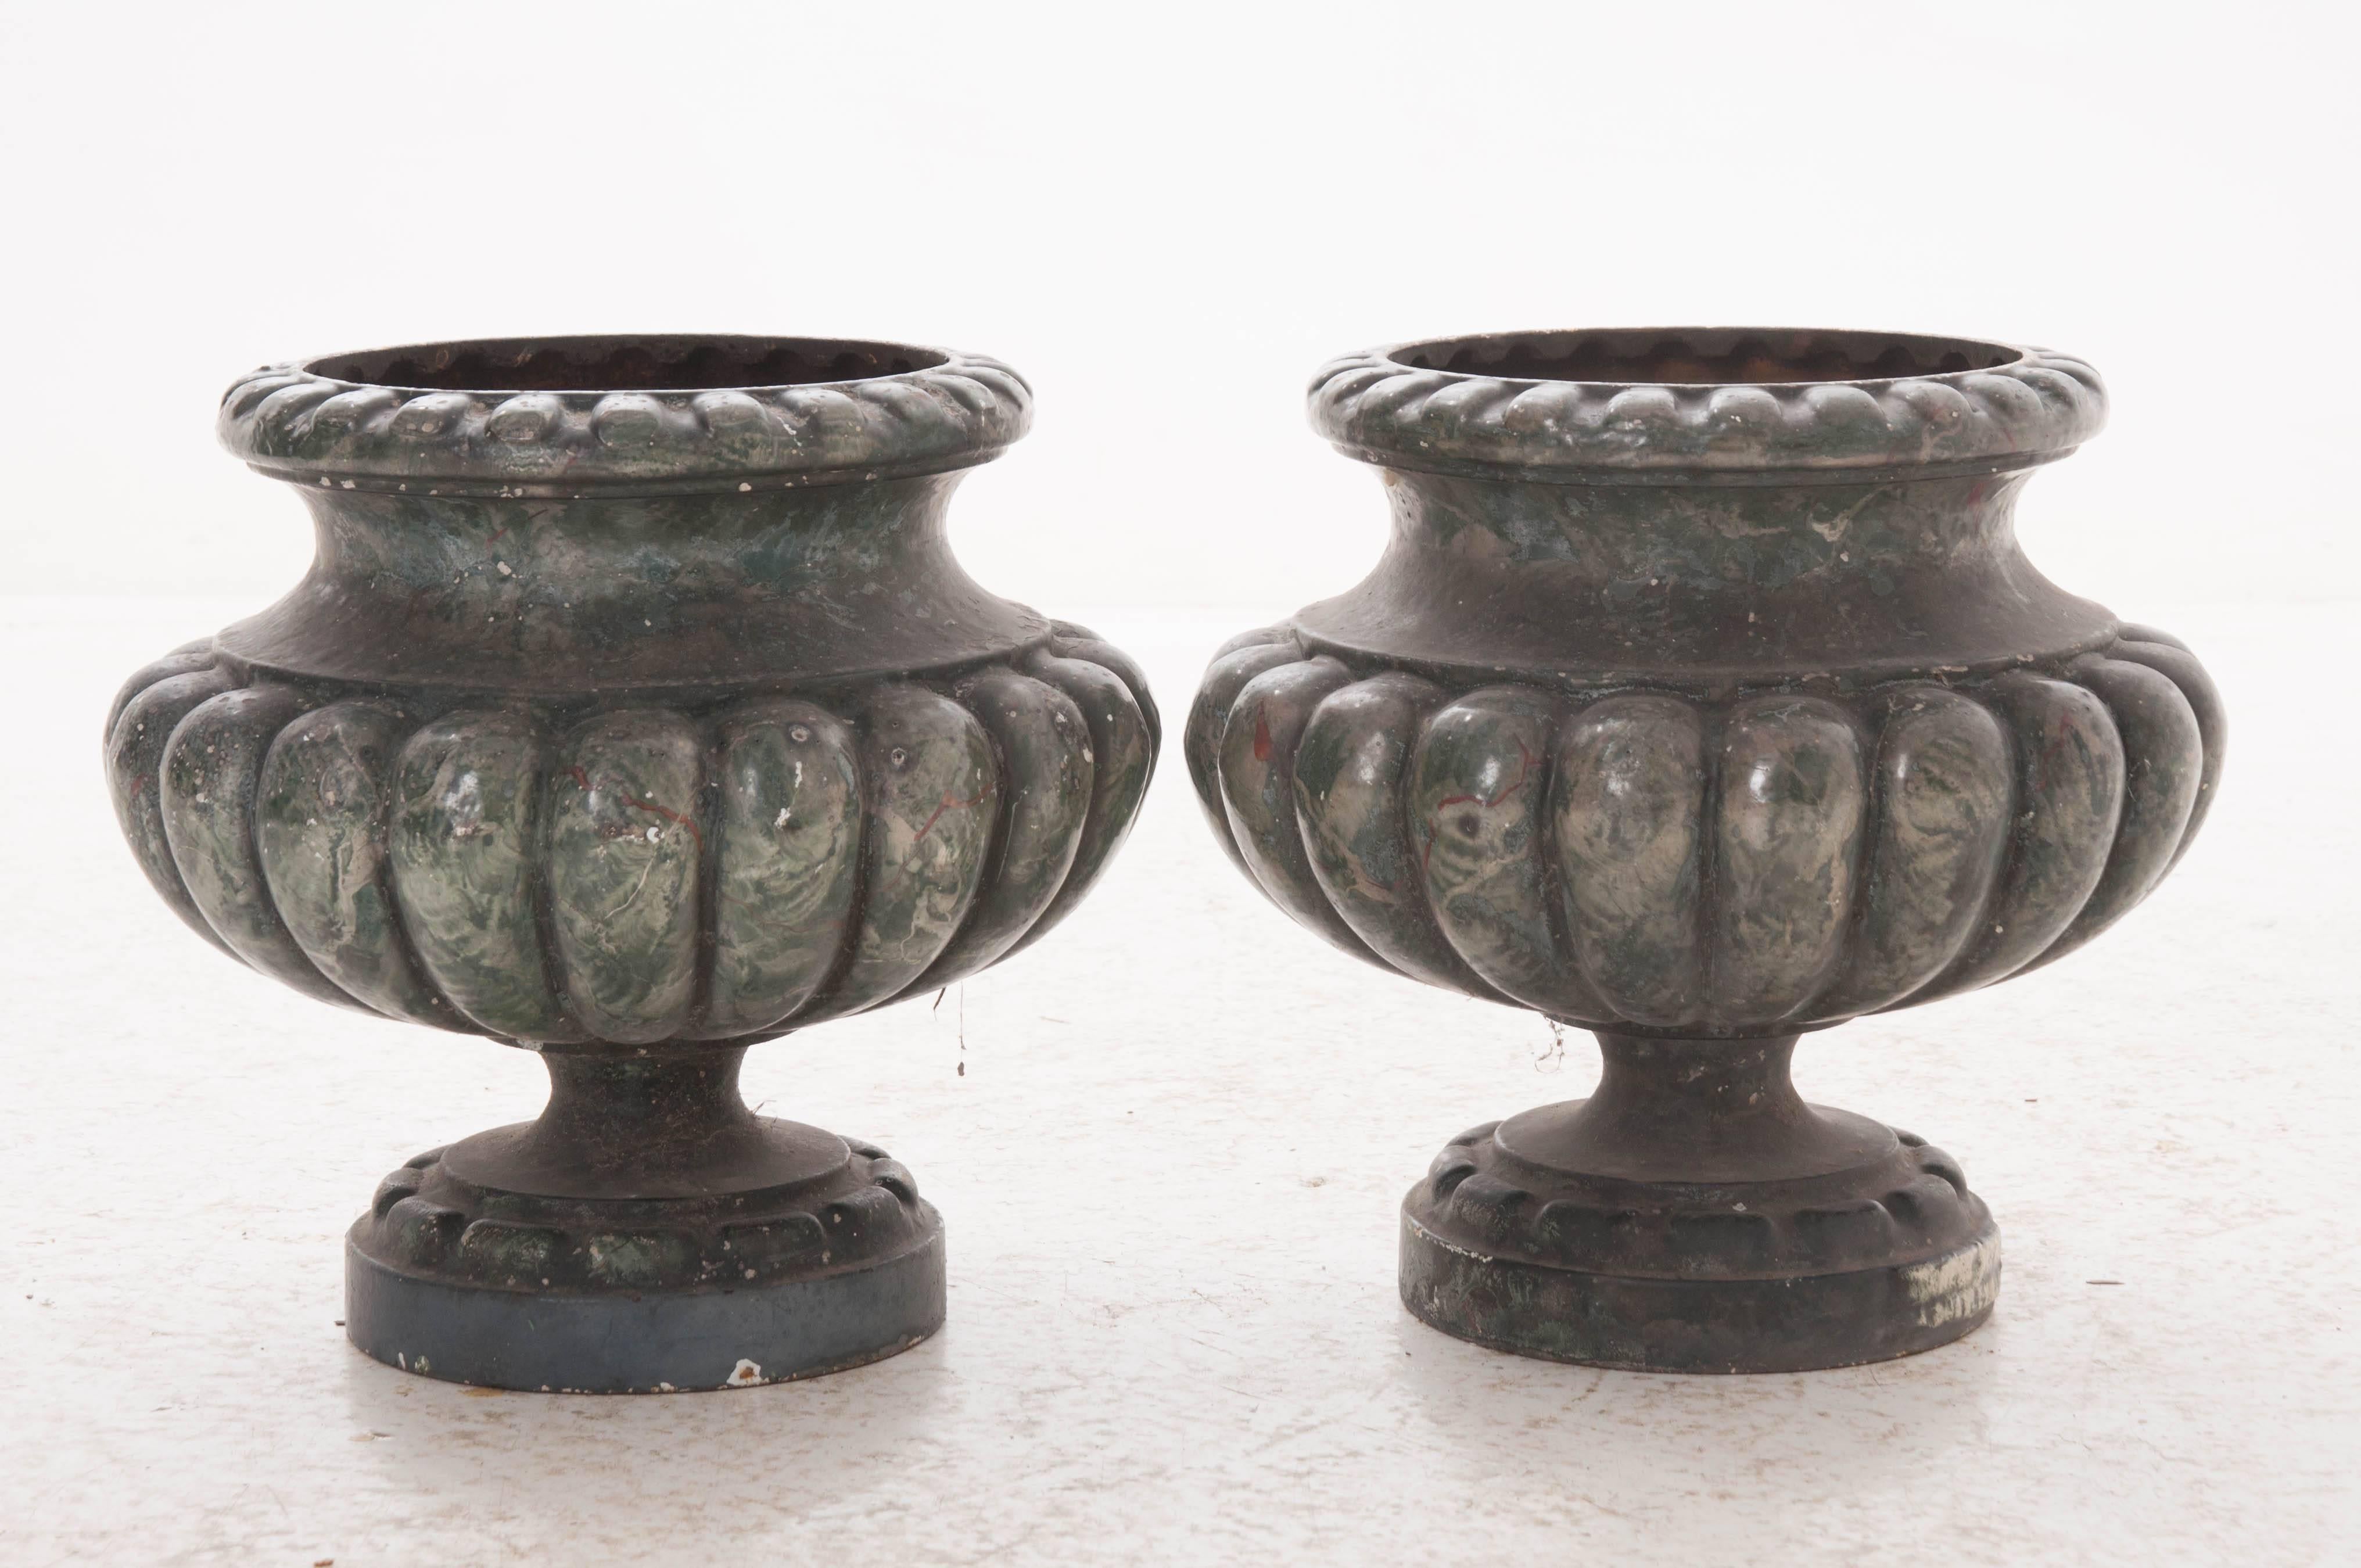 A fantastic pair of classical urn form, cast iron pots from early 20th century France. These pots have been painted in a realistic faux green and gray marble that makes these pots seem to have been carved from stone. These pots are both equipped